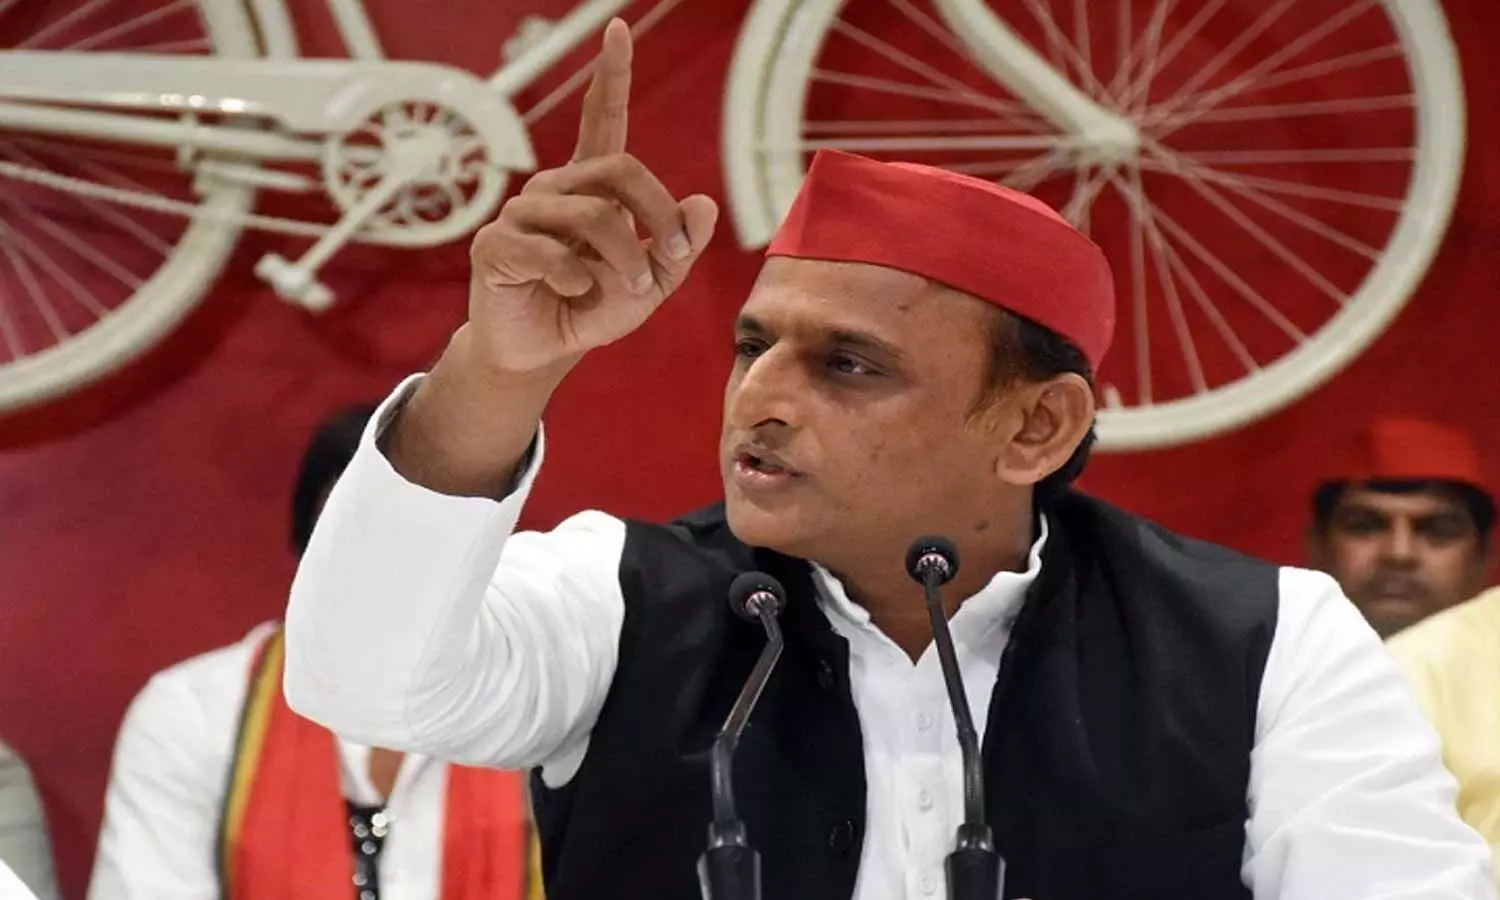 UP Election 2022: SP announces 11 more candidates, two seats each in Pratapgarh, Ayodhya, MLA RK Verma